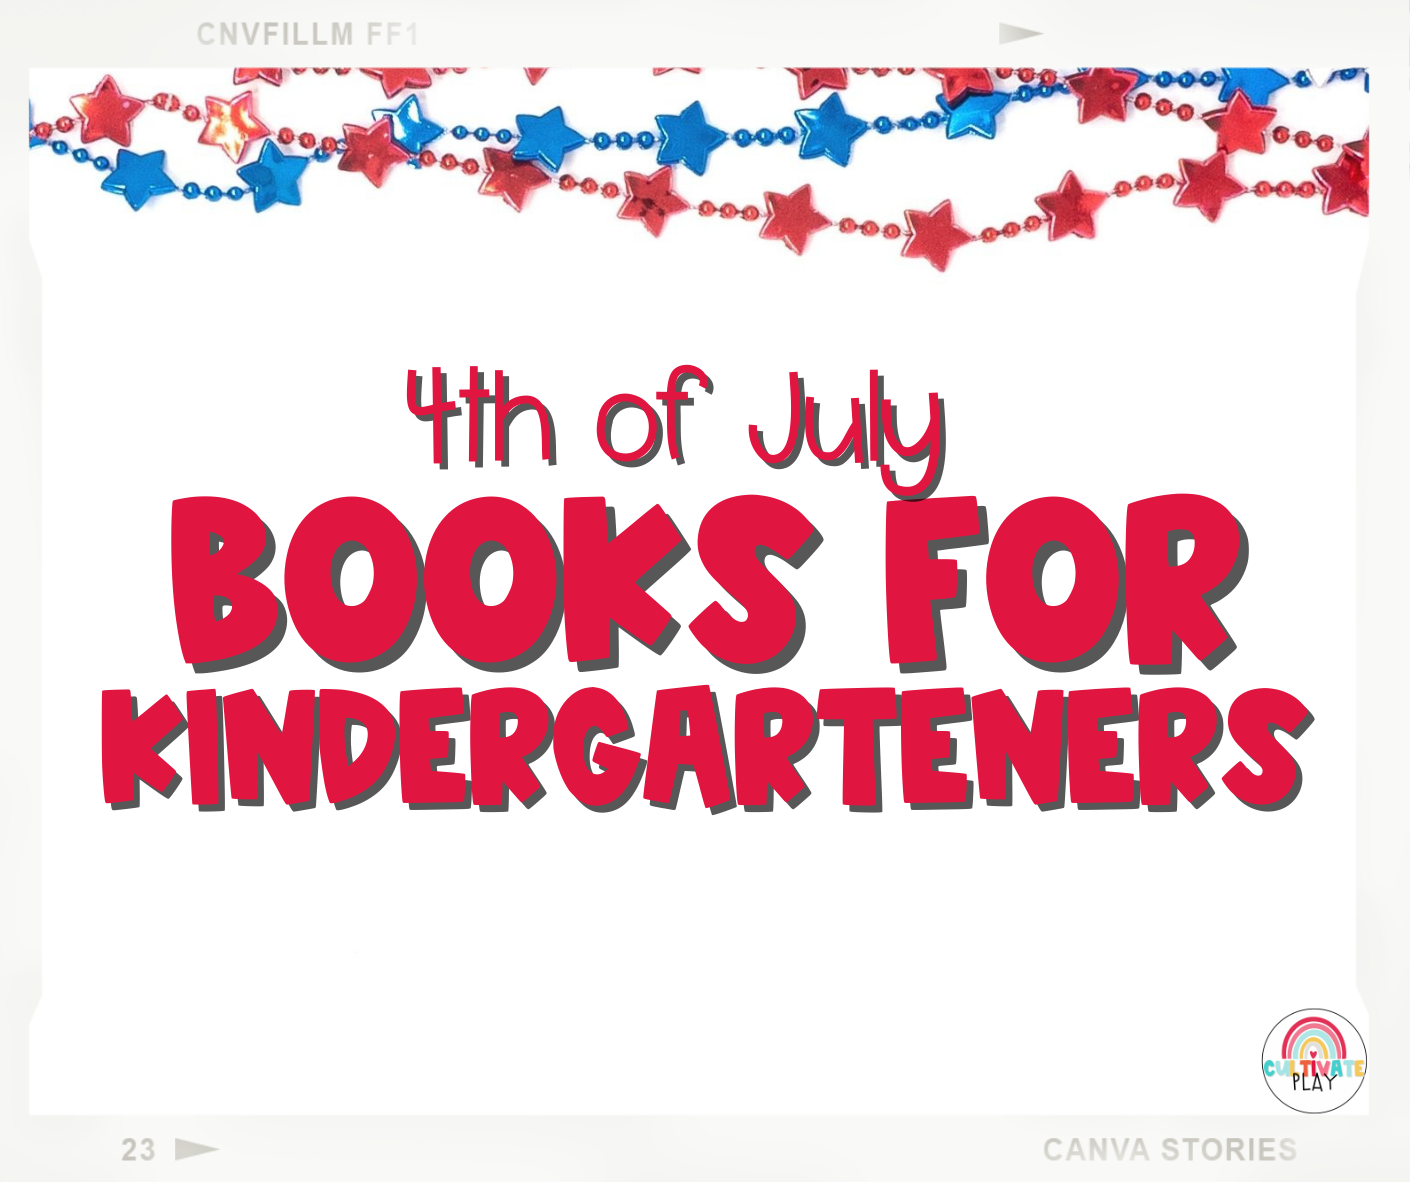 An image with star necklaces in red and blue, showcasing 4th of July Books for Kindergarteners.